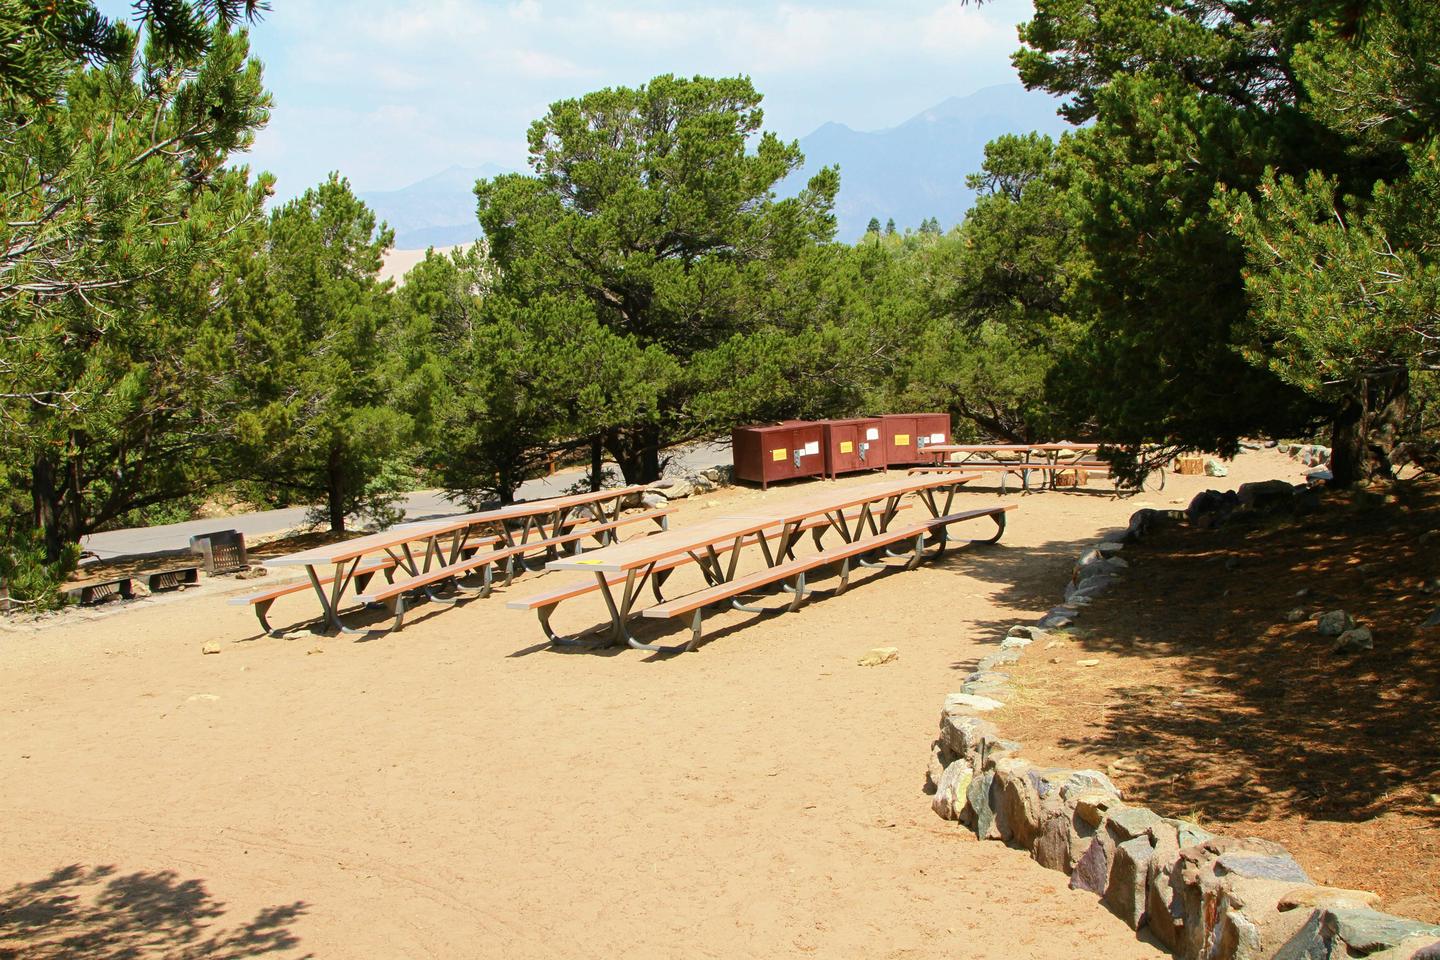 View of Group Site "B" tent area with lines of picnic tables, fire rings, and bear boxes.Group Site B, Pinon Flats Campground